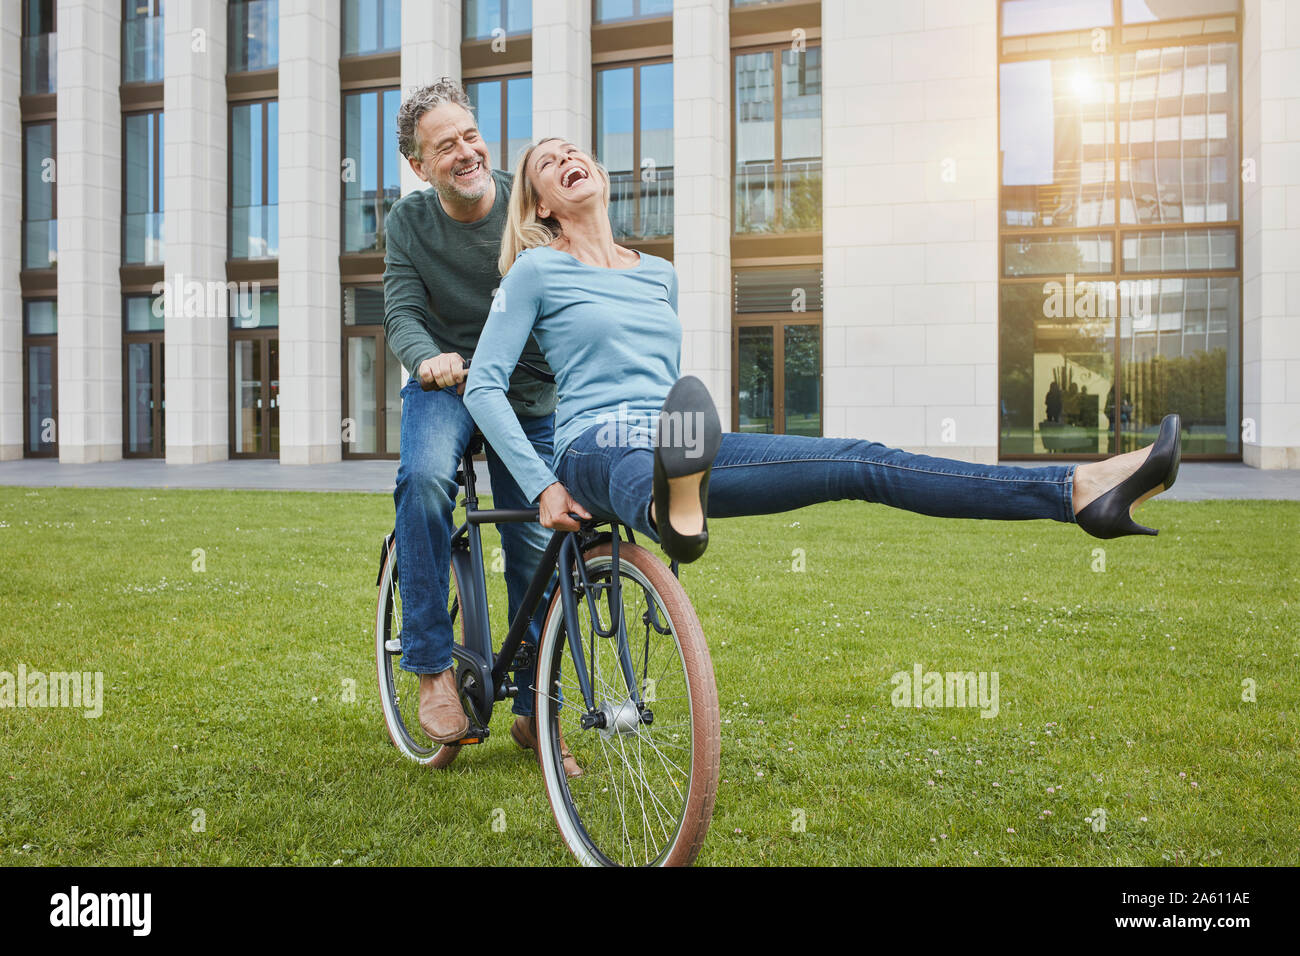 Exuberant mature couple riding bicycle on lawn in the city Stock Photo